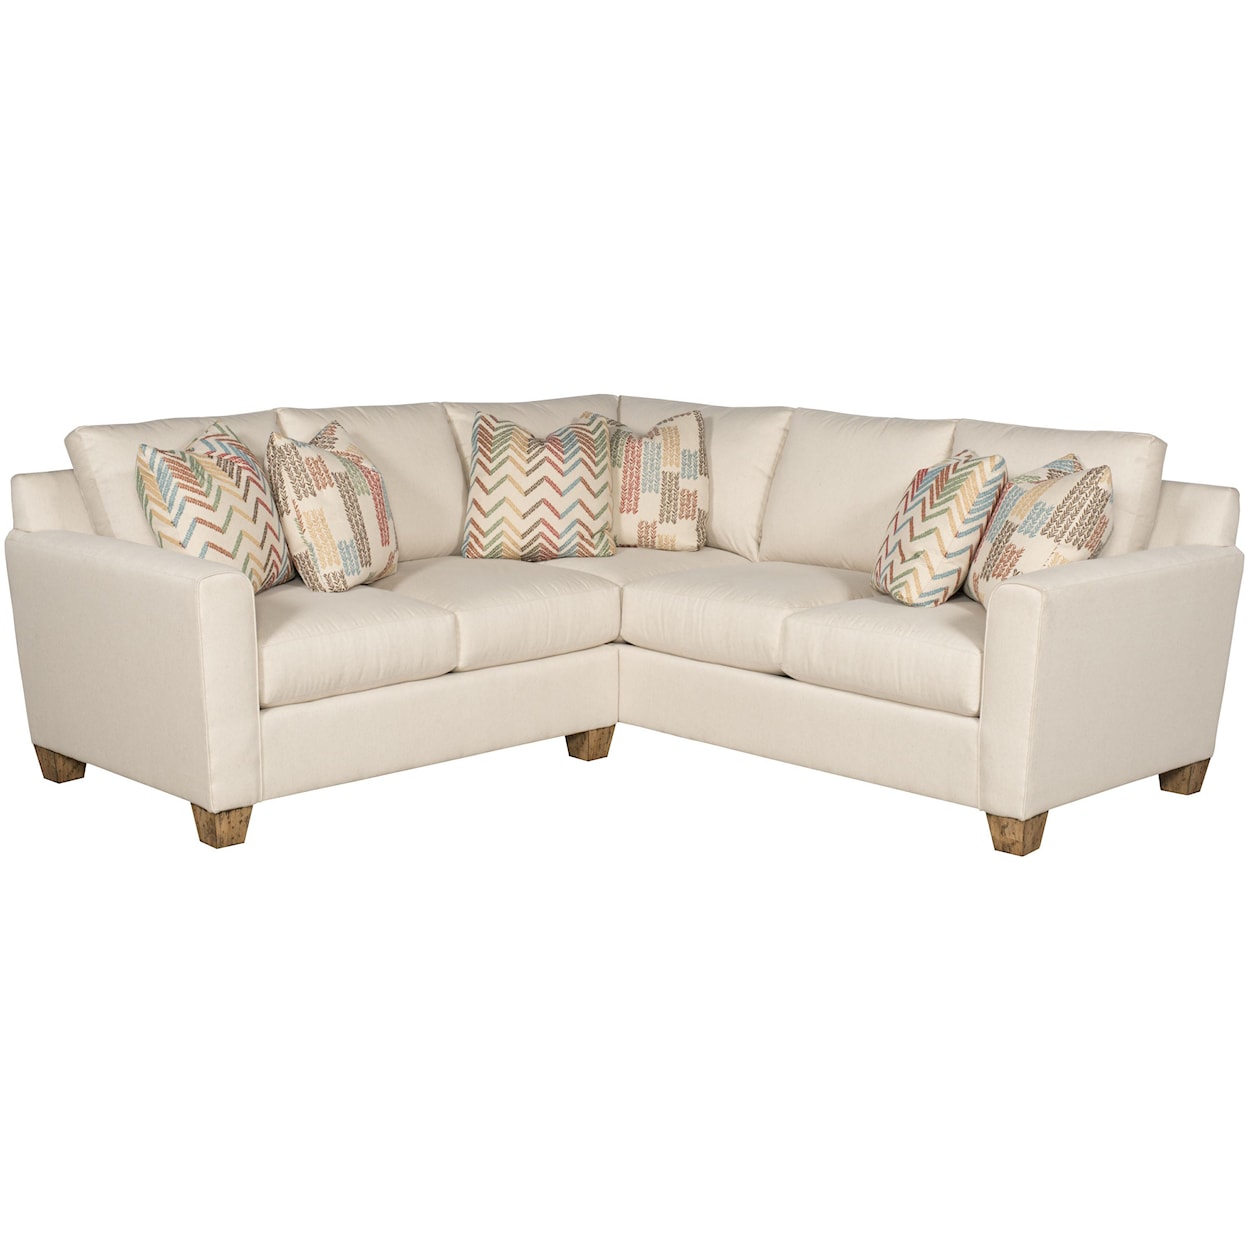 King Hickory Darby Sectional Sofa